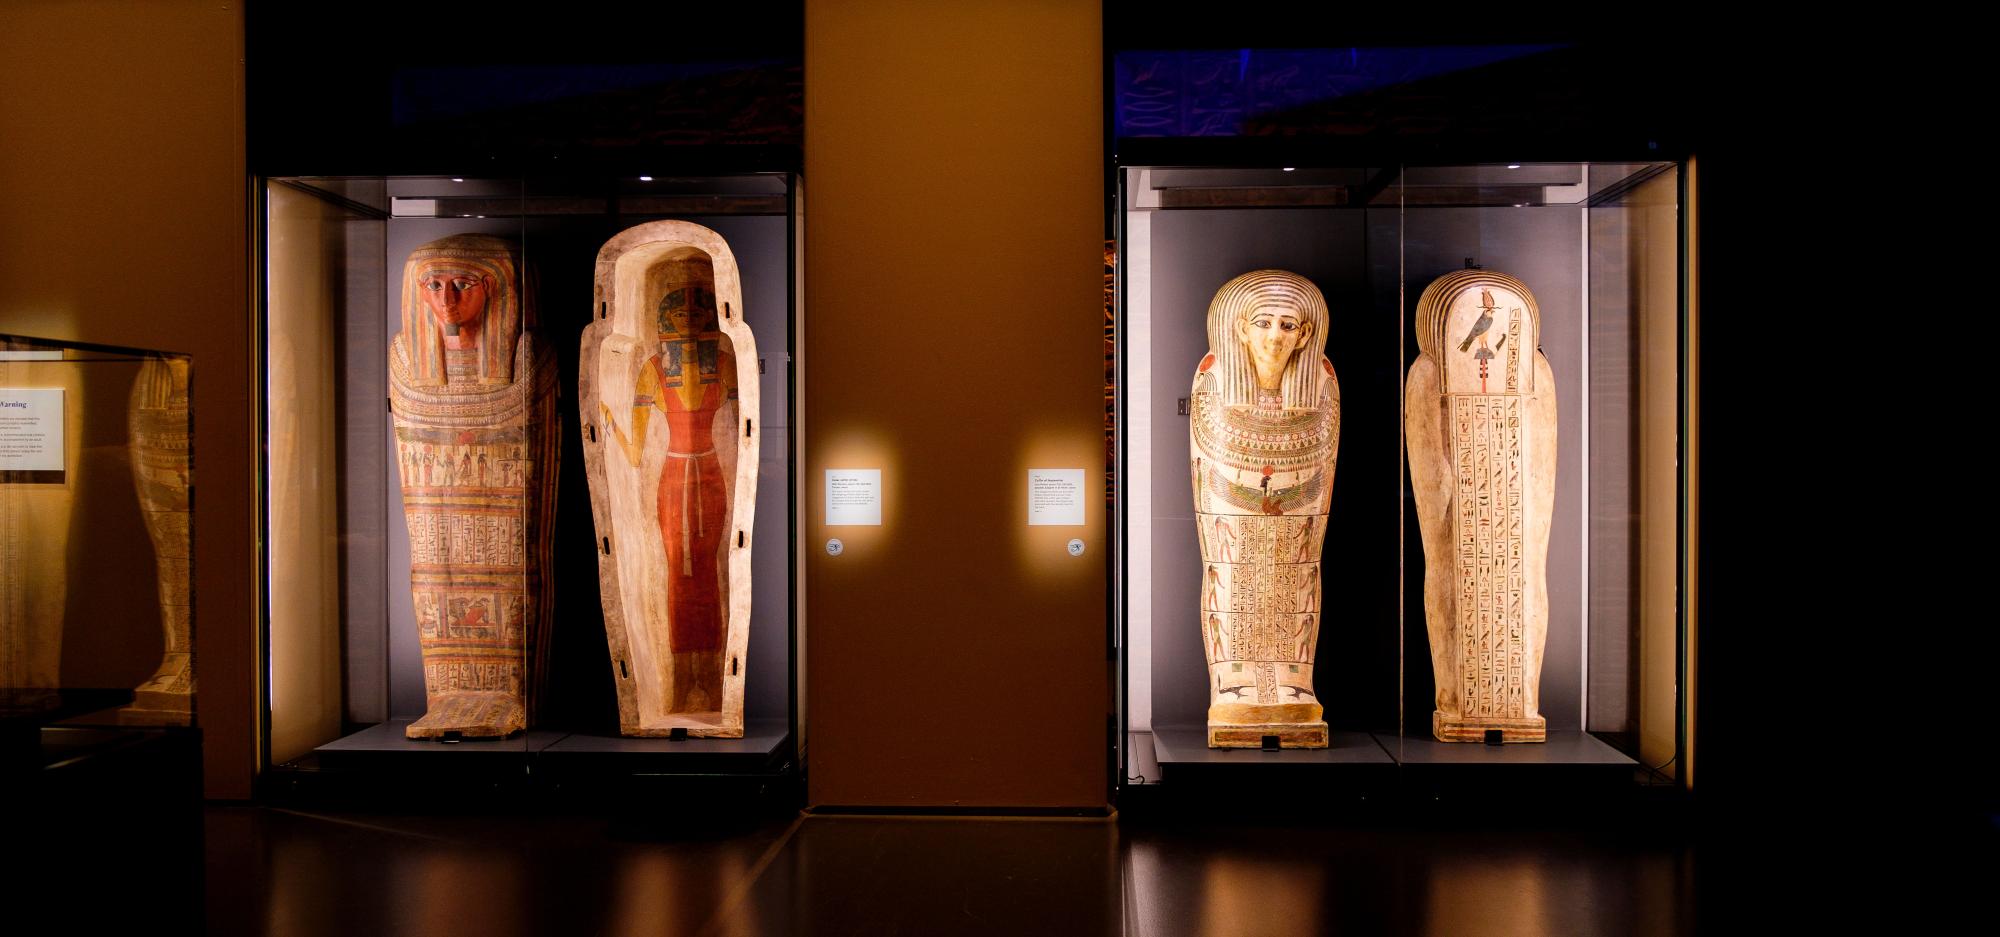 A dramatically-lit gallery with two coffins standing upright on display. The coffin on the left shows an image of an Egyptian goddess while the coffin on the right shows intricate hieroglyphs.